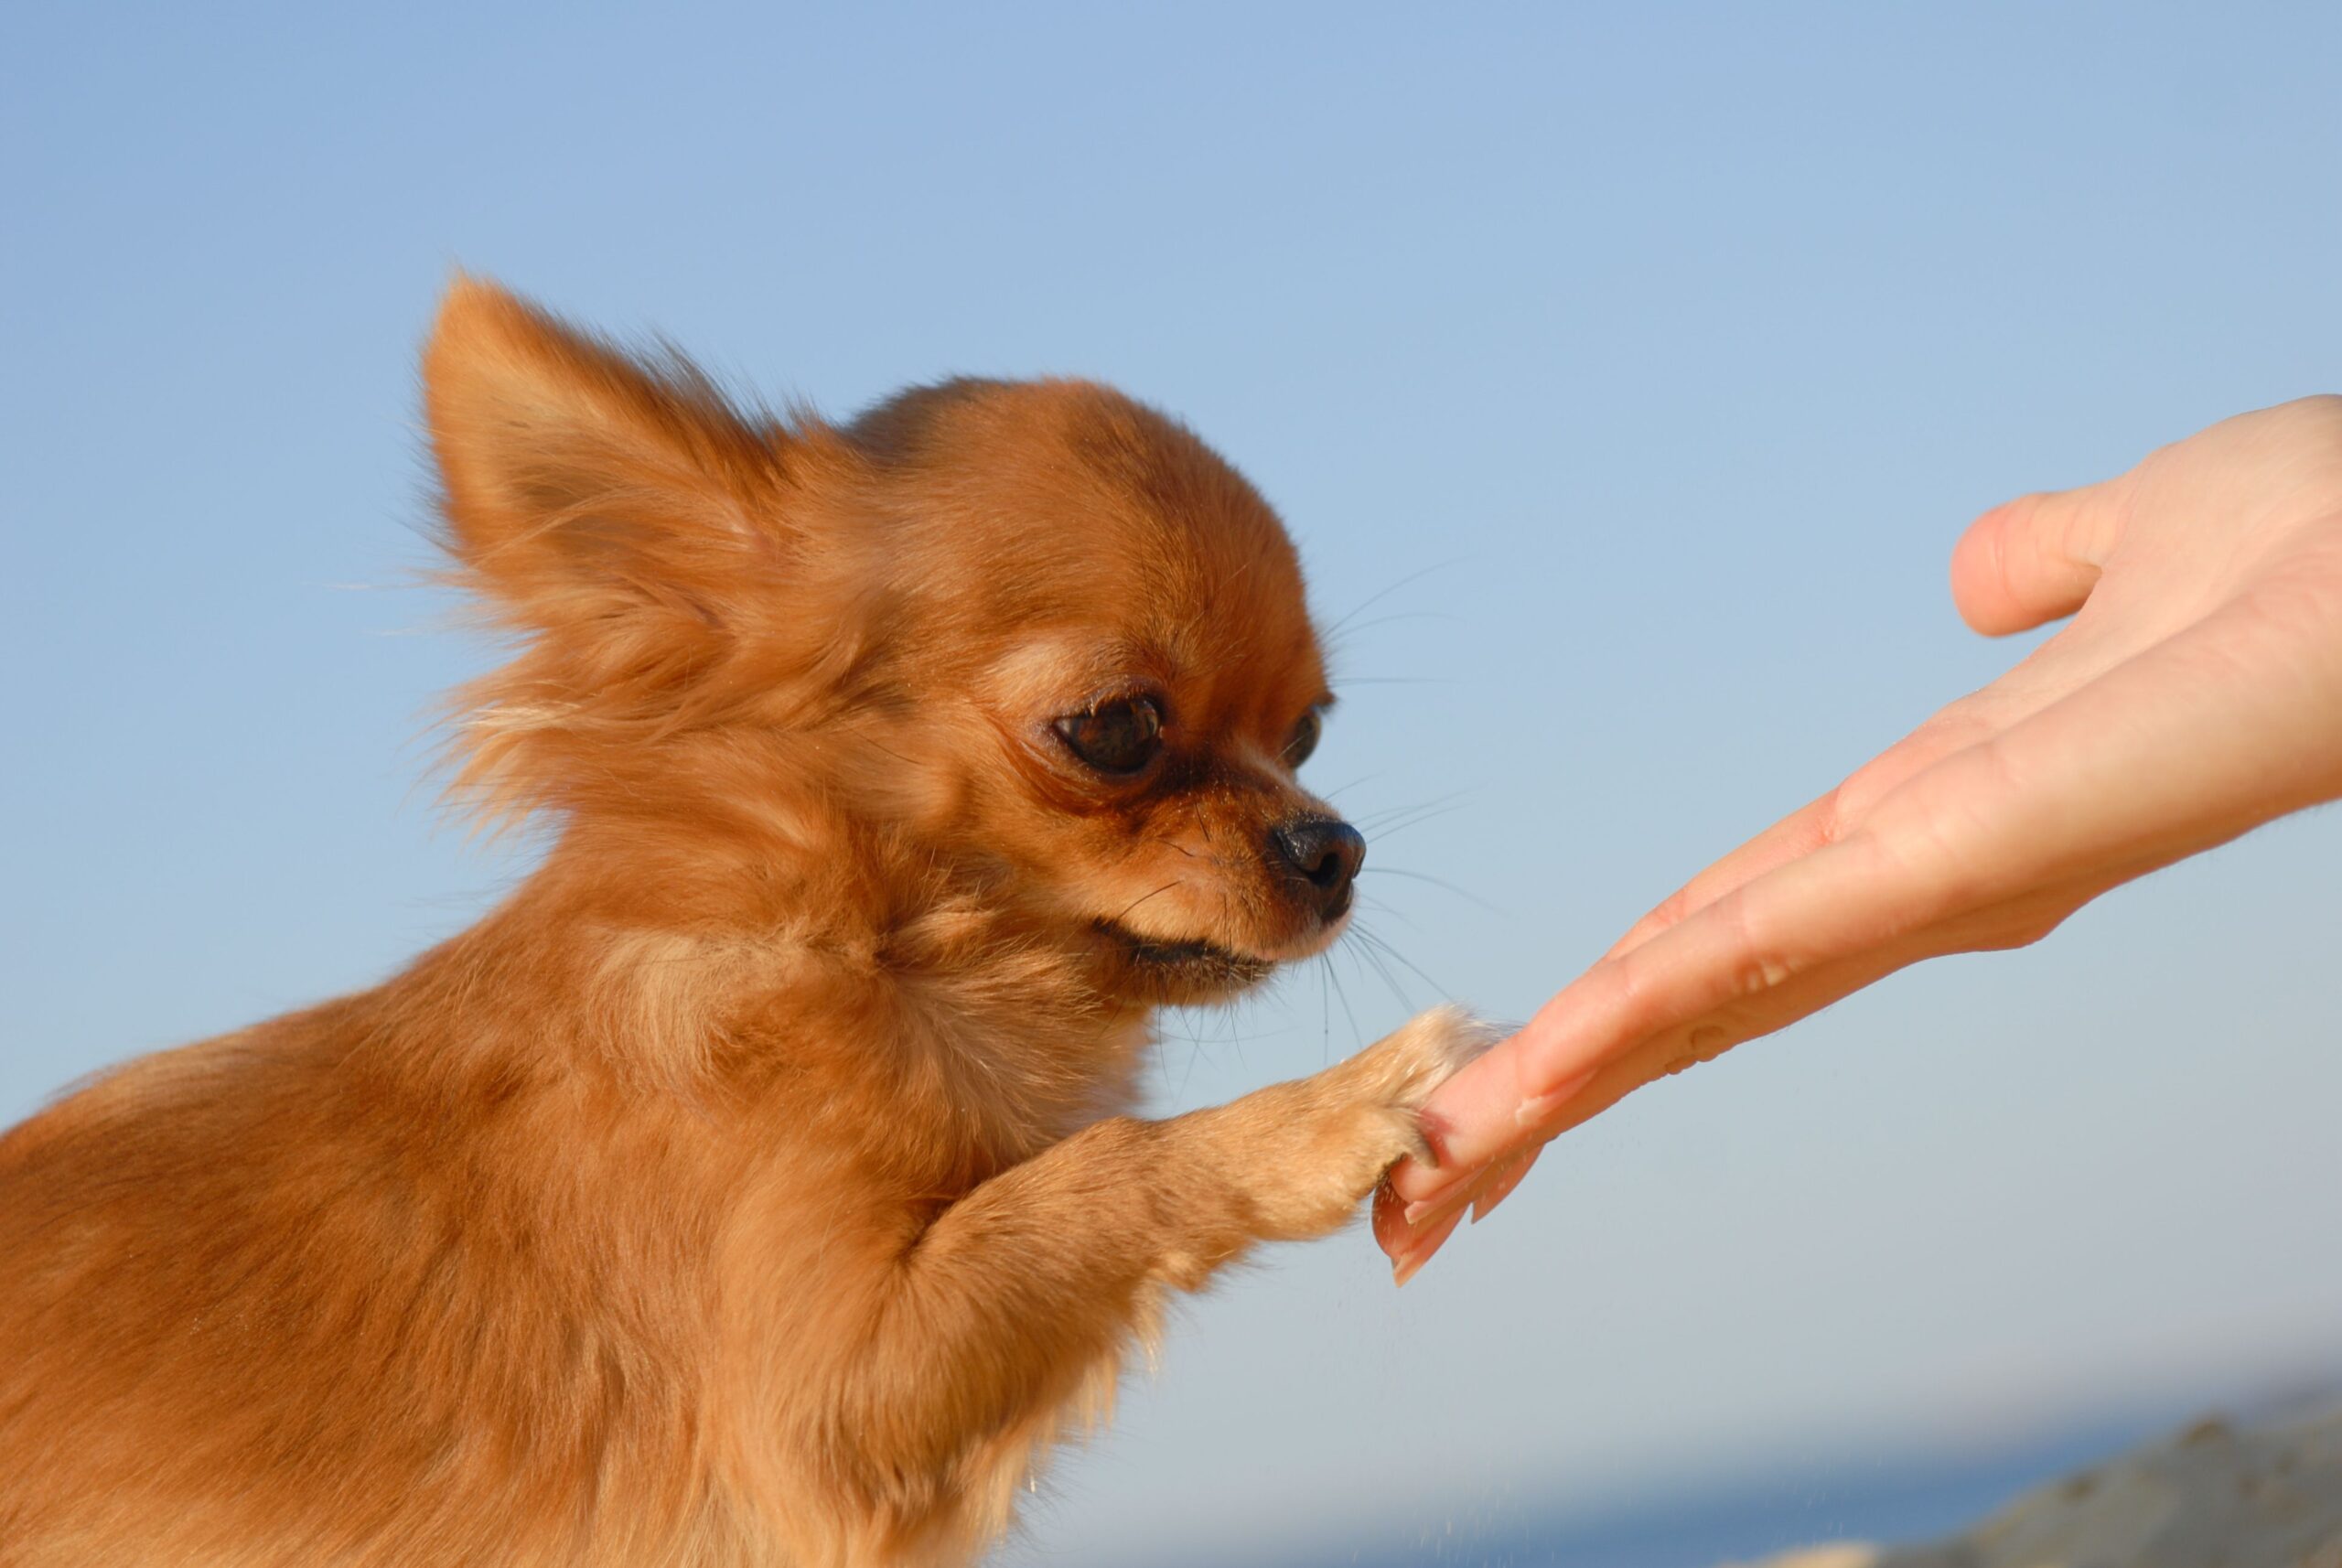 Chihuahua pawing a hand